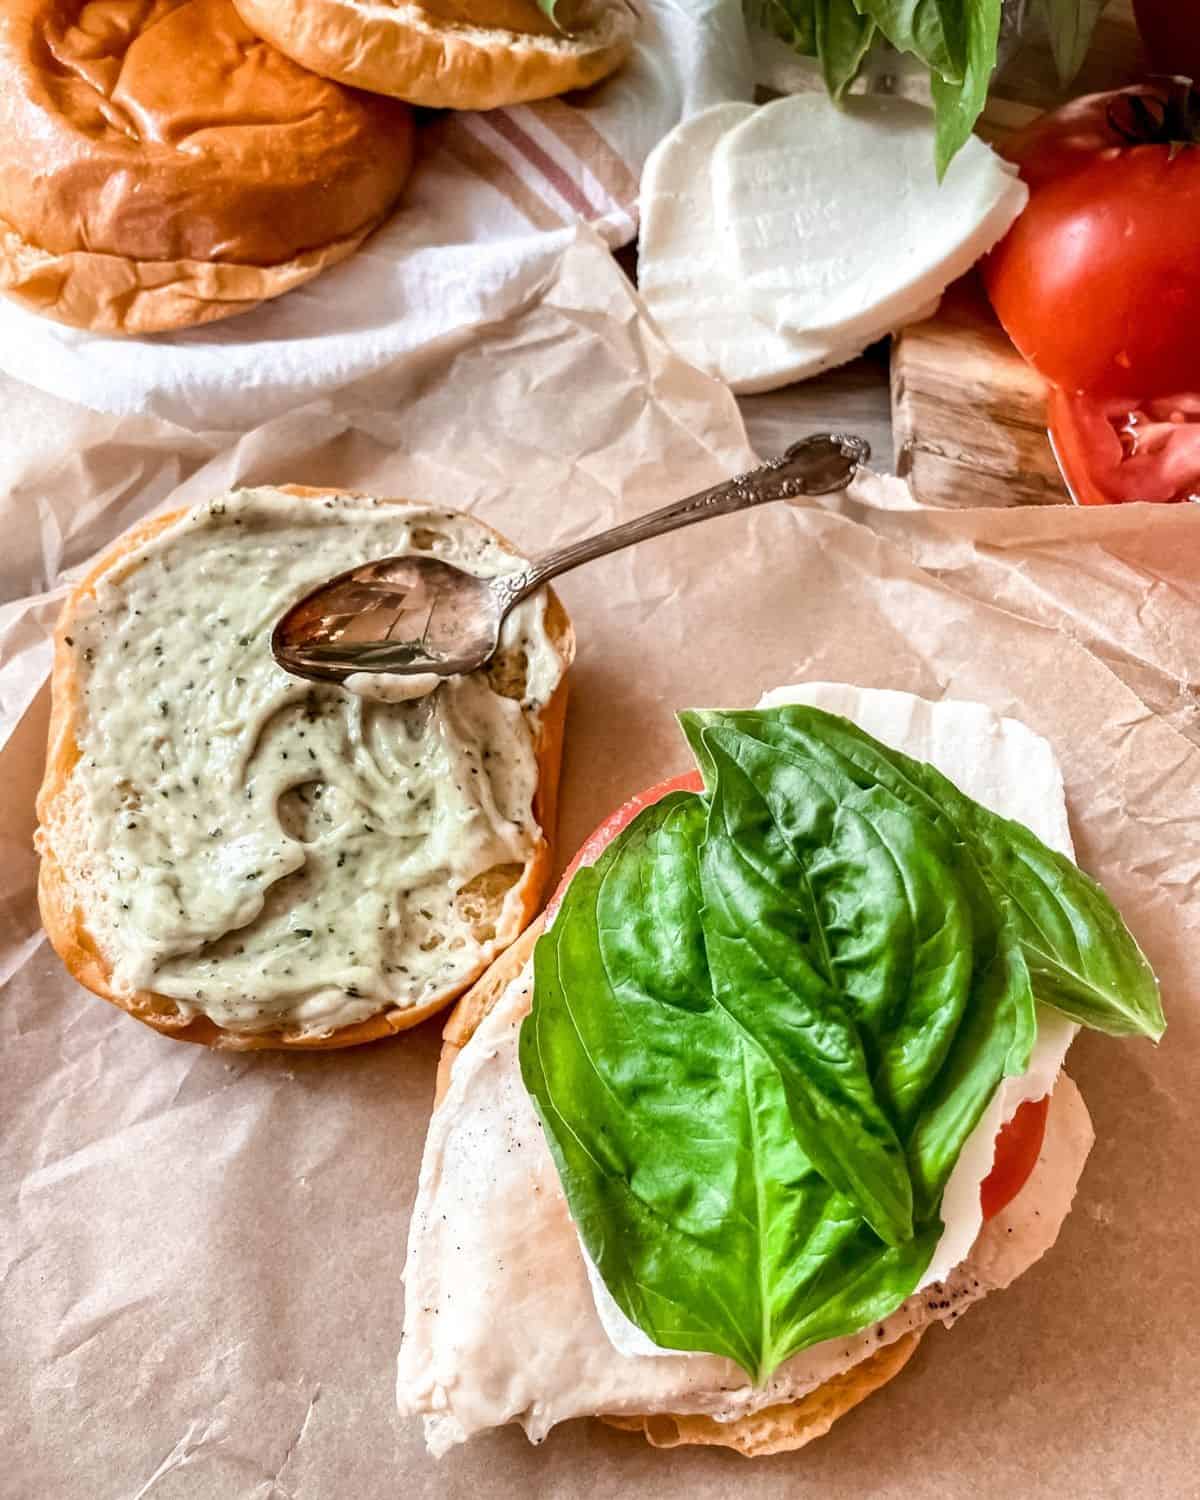 Open face chicken sandwich with pesto mayo spread on one side of the open bun, on parchment paper, extra buns, fresh mozzarella and tomatoes are seen in the background.